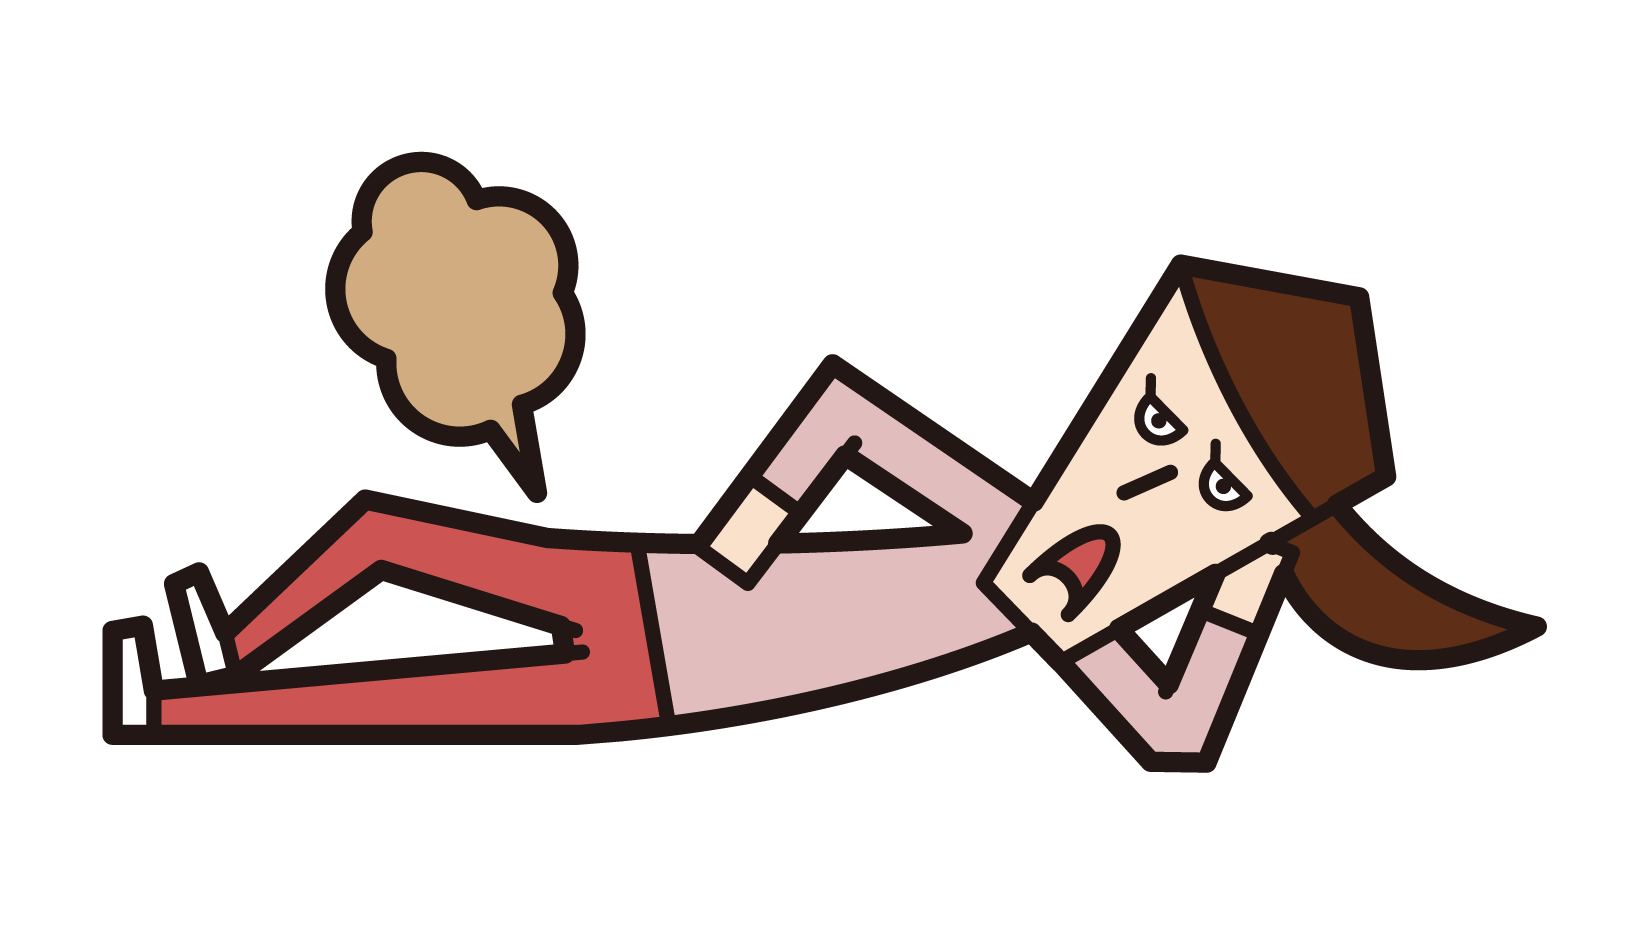 Illustration of a person (female) farting while sleeping